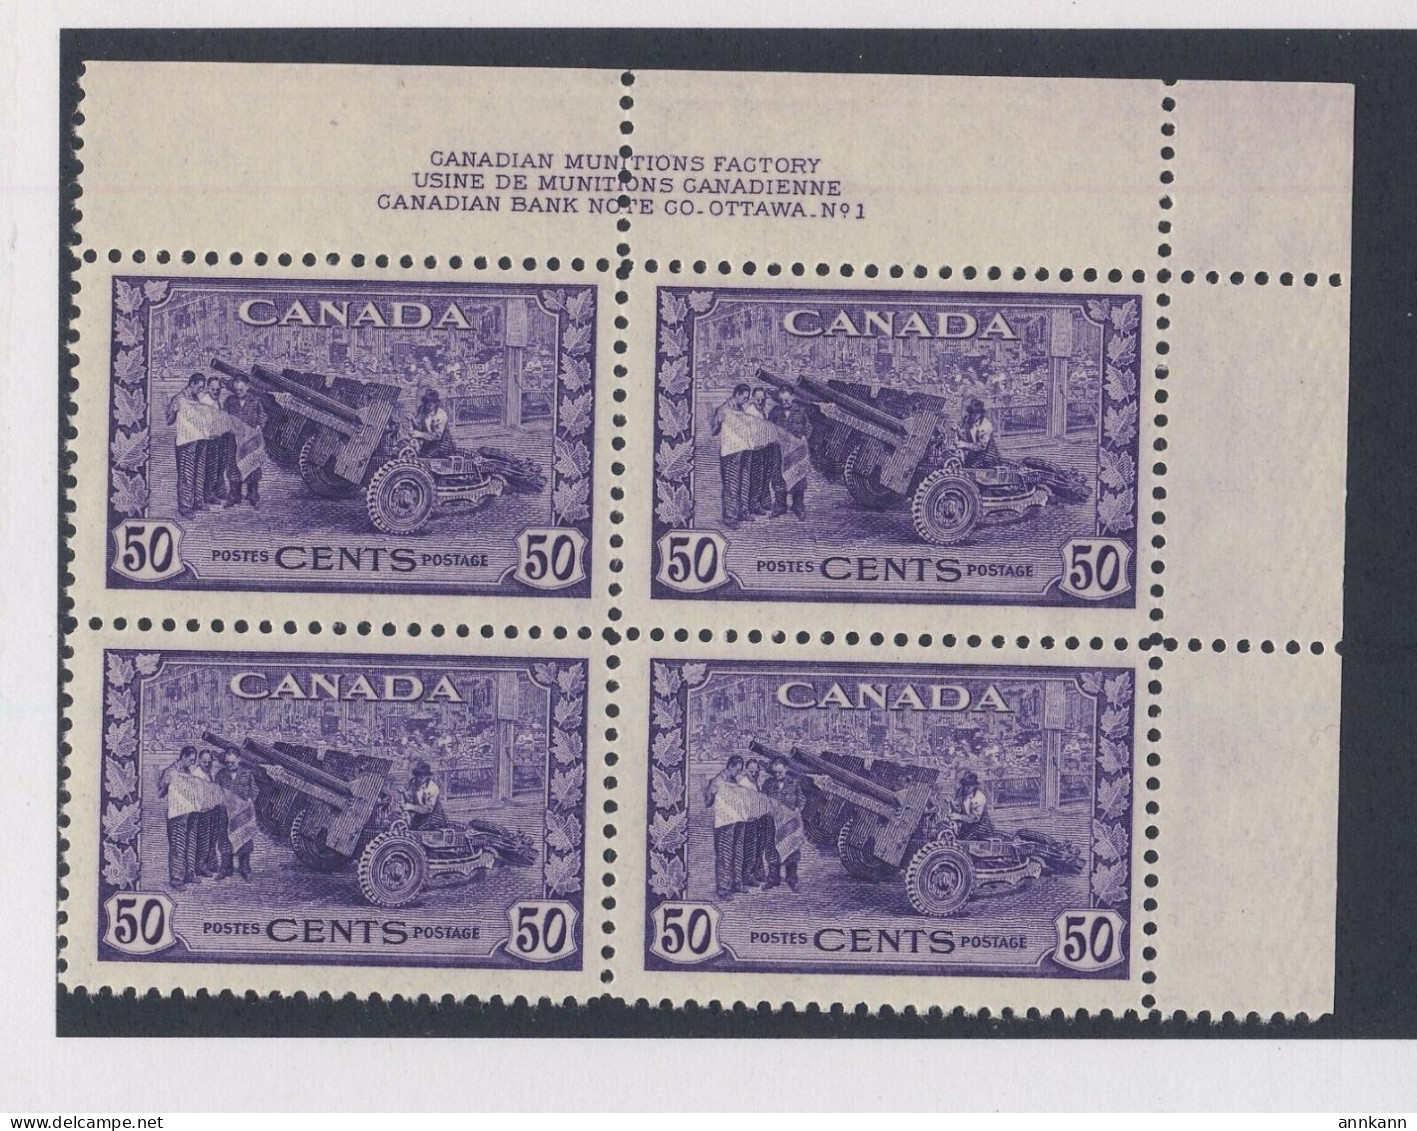 Canada Plate Block #1 Stamp #261 -50c MUNITIONS FACTORY Armories MH On Top Selvedge VF GV=$225.00 - Blocks & Sheetlets